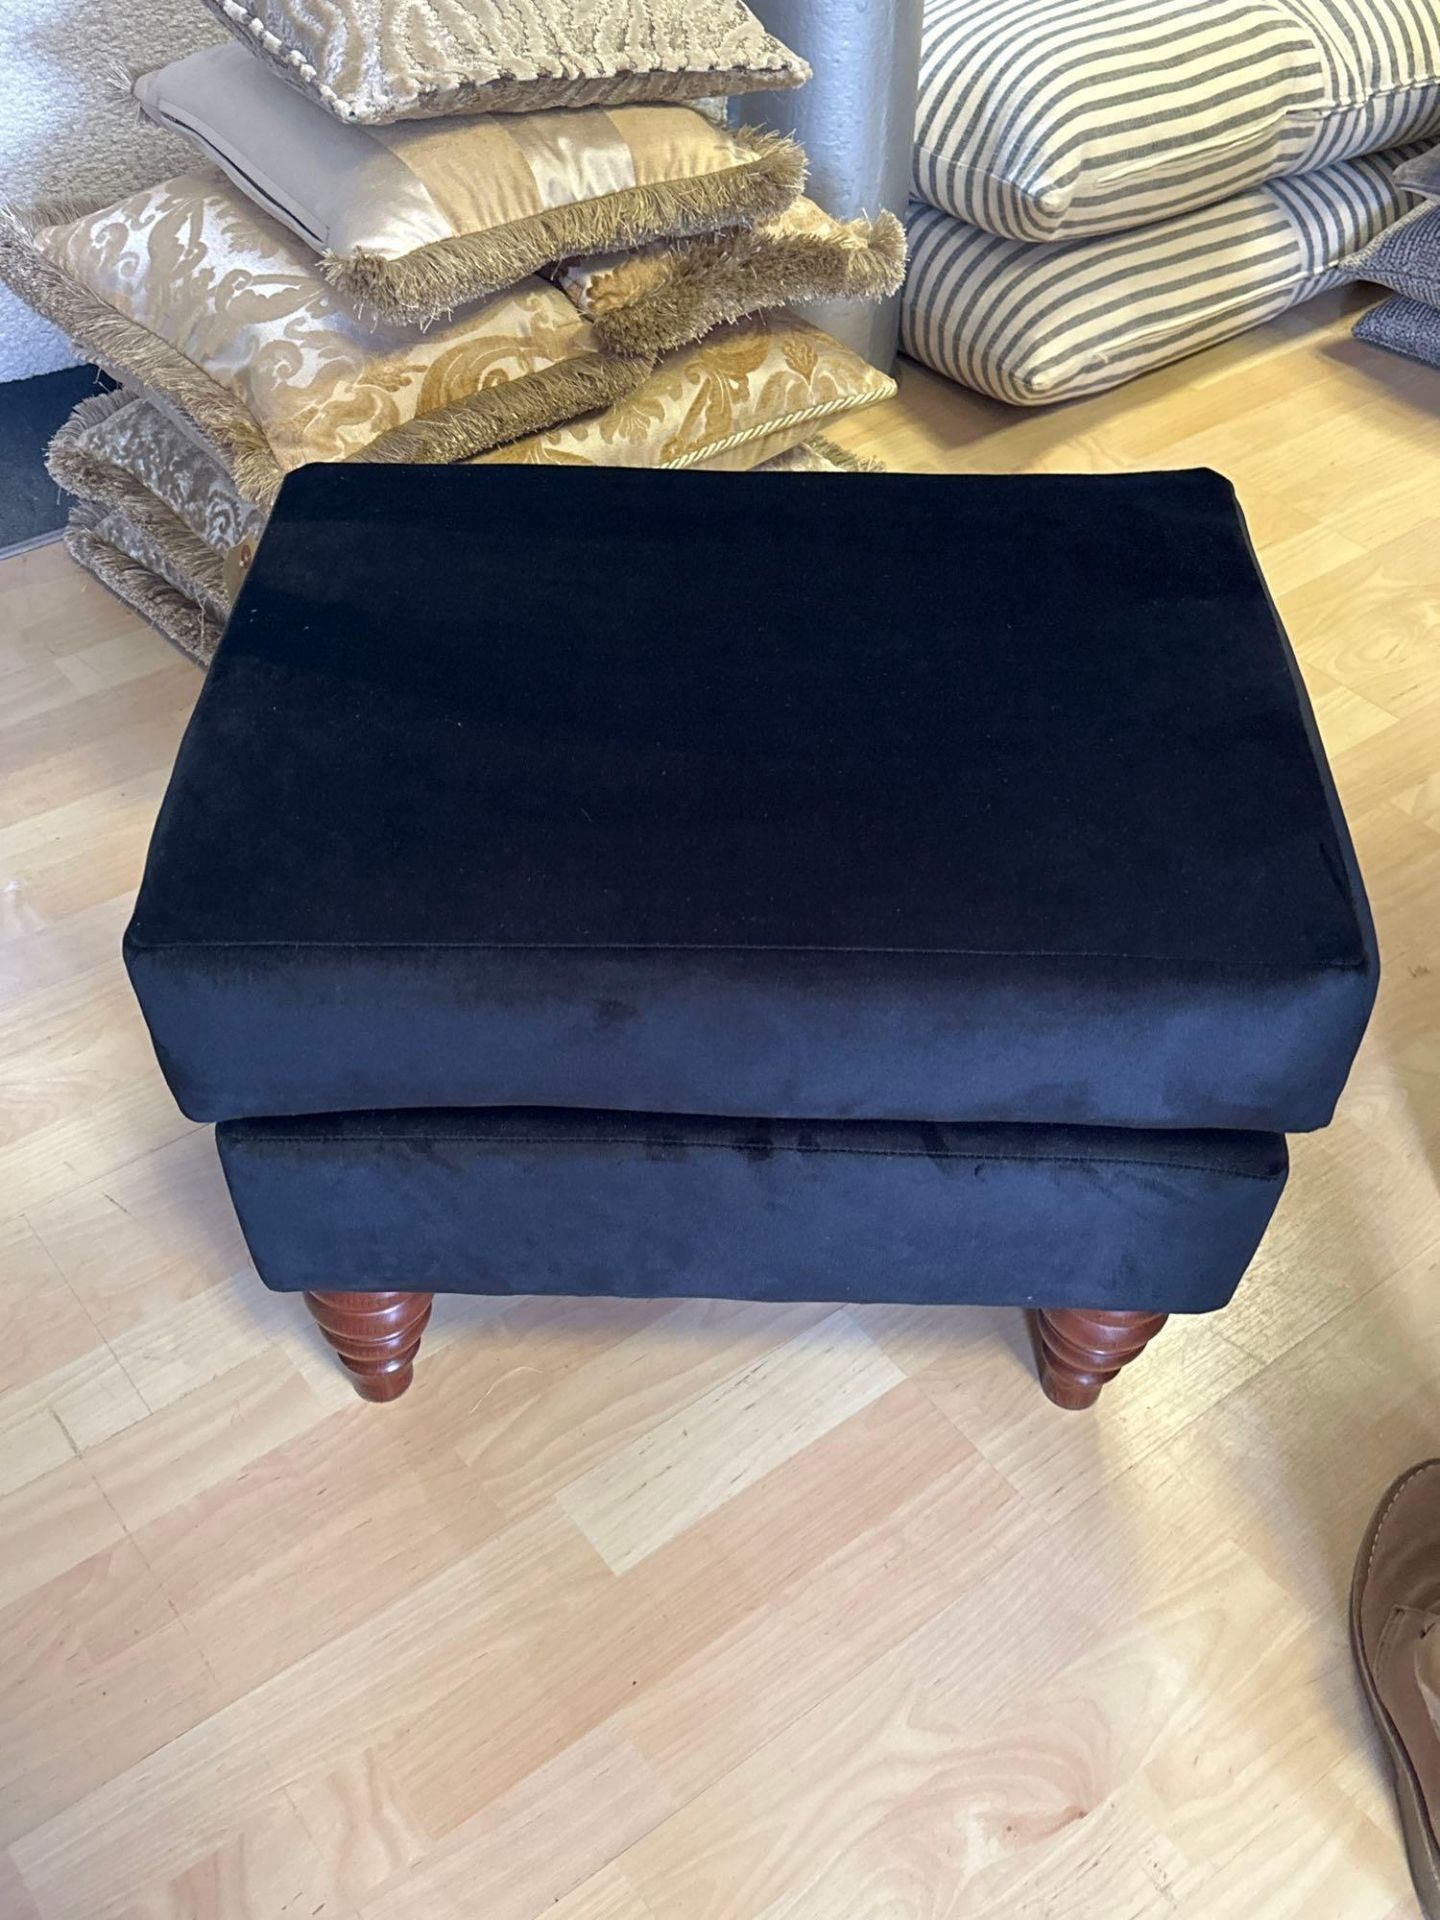 Accent Footstool In Midnight Black Velvet. Expertly Crafted, This Exquisite Footstool Boasts A